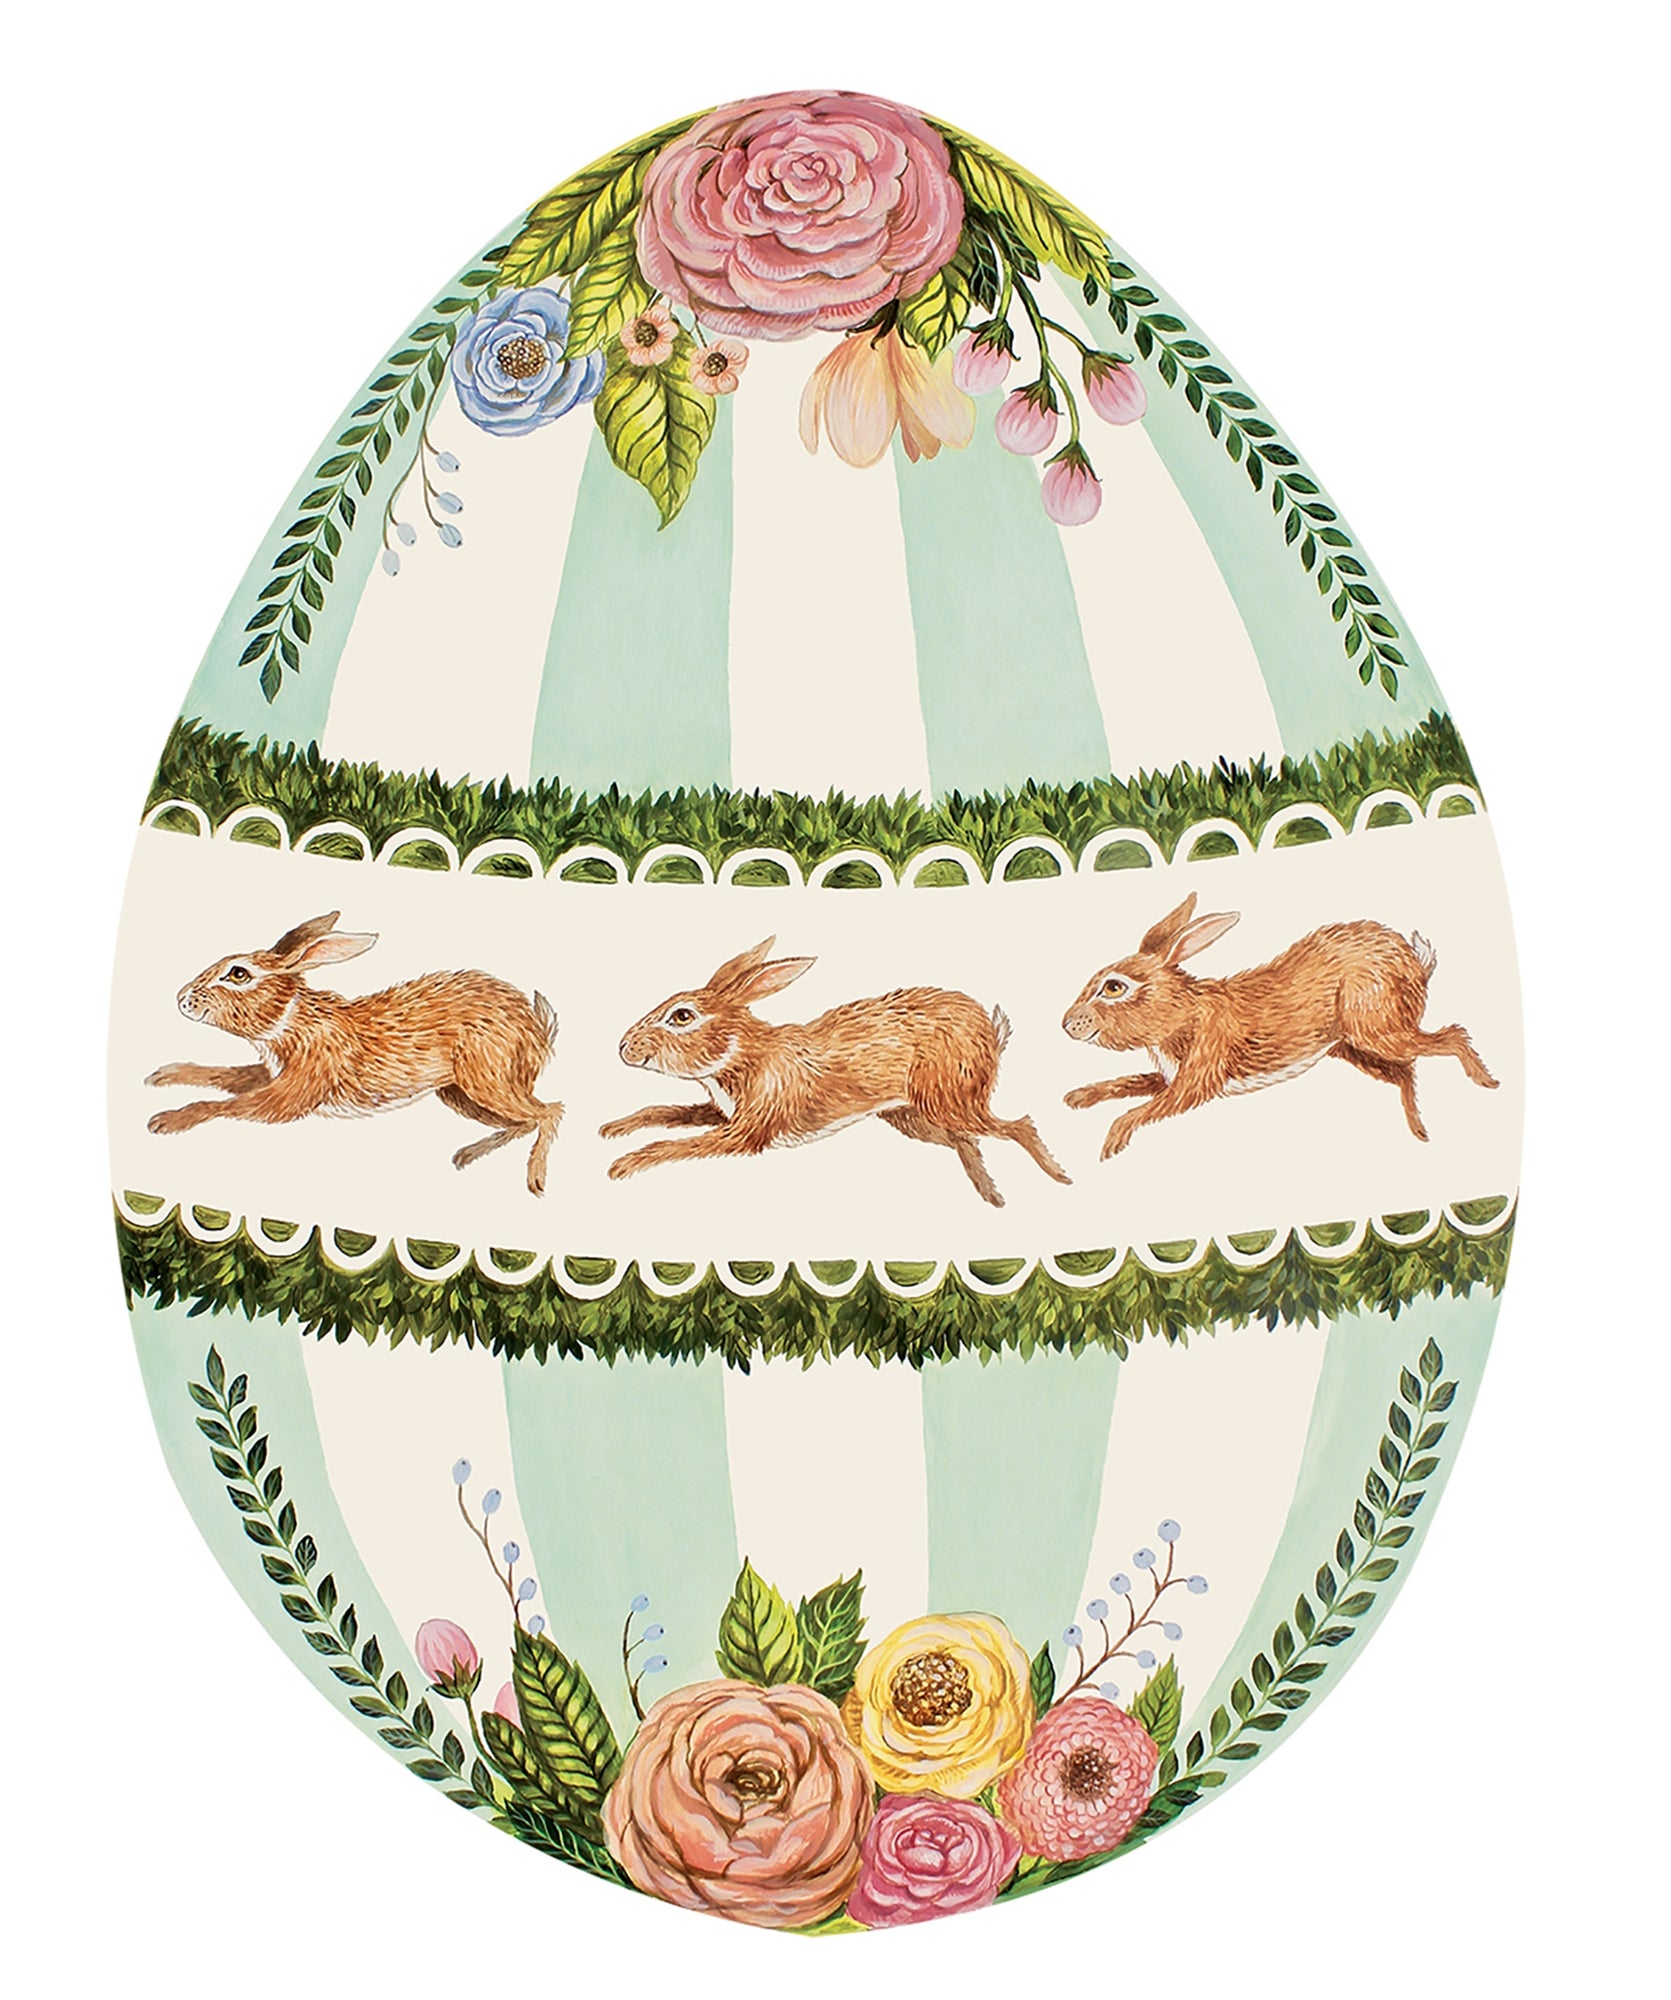 A large easter egg placemats decorated with flowers and rabbits.